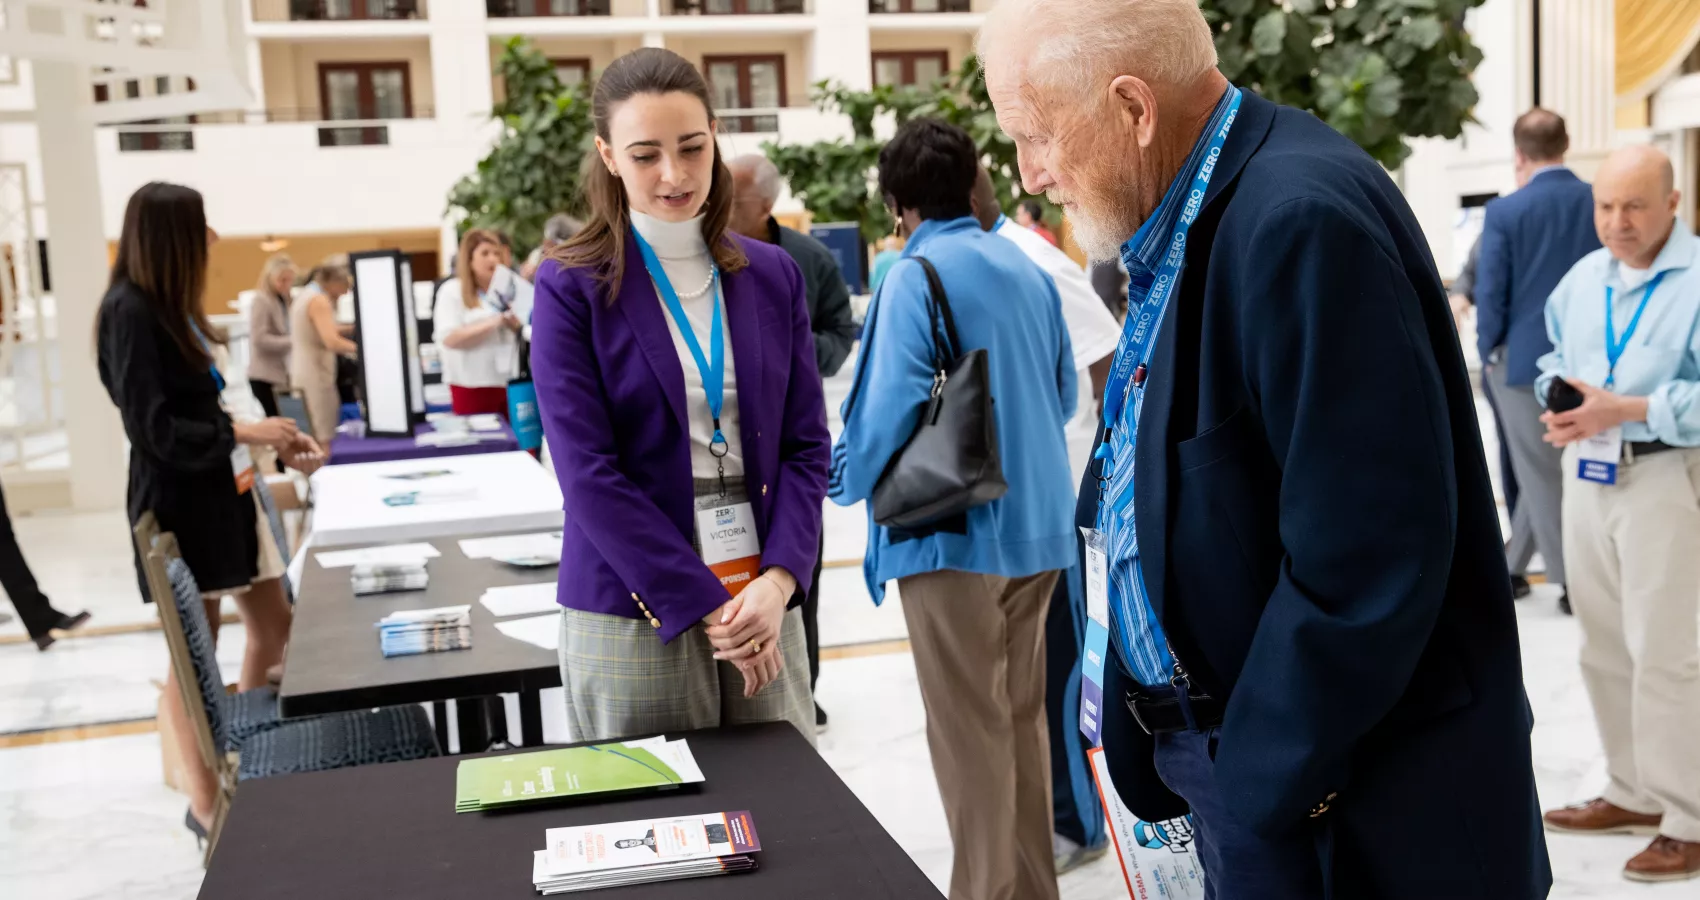 Young woman presenting educational materials to an elderly man at an event stand